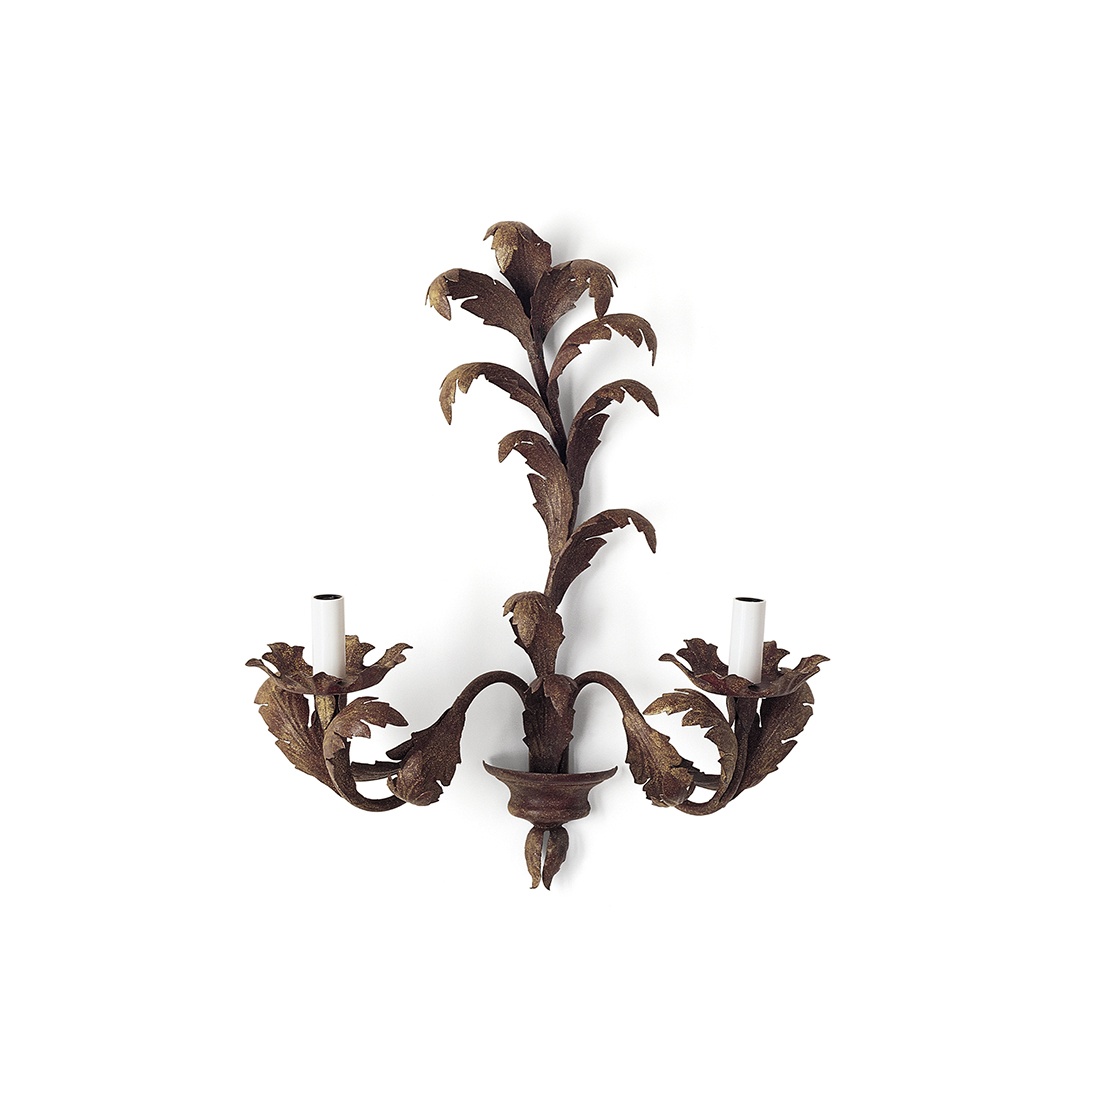 Verona wall light (2 arms) in Wrought iron - Beaumont & Fletcher